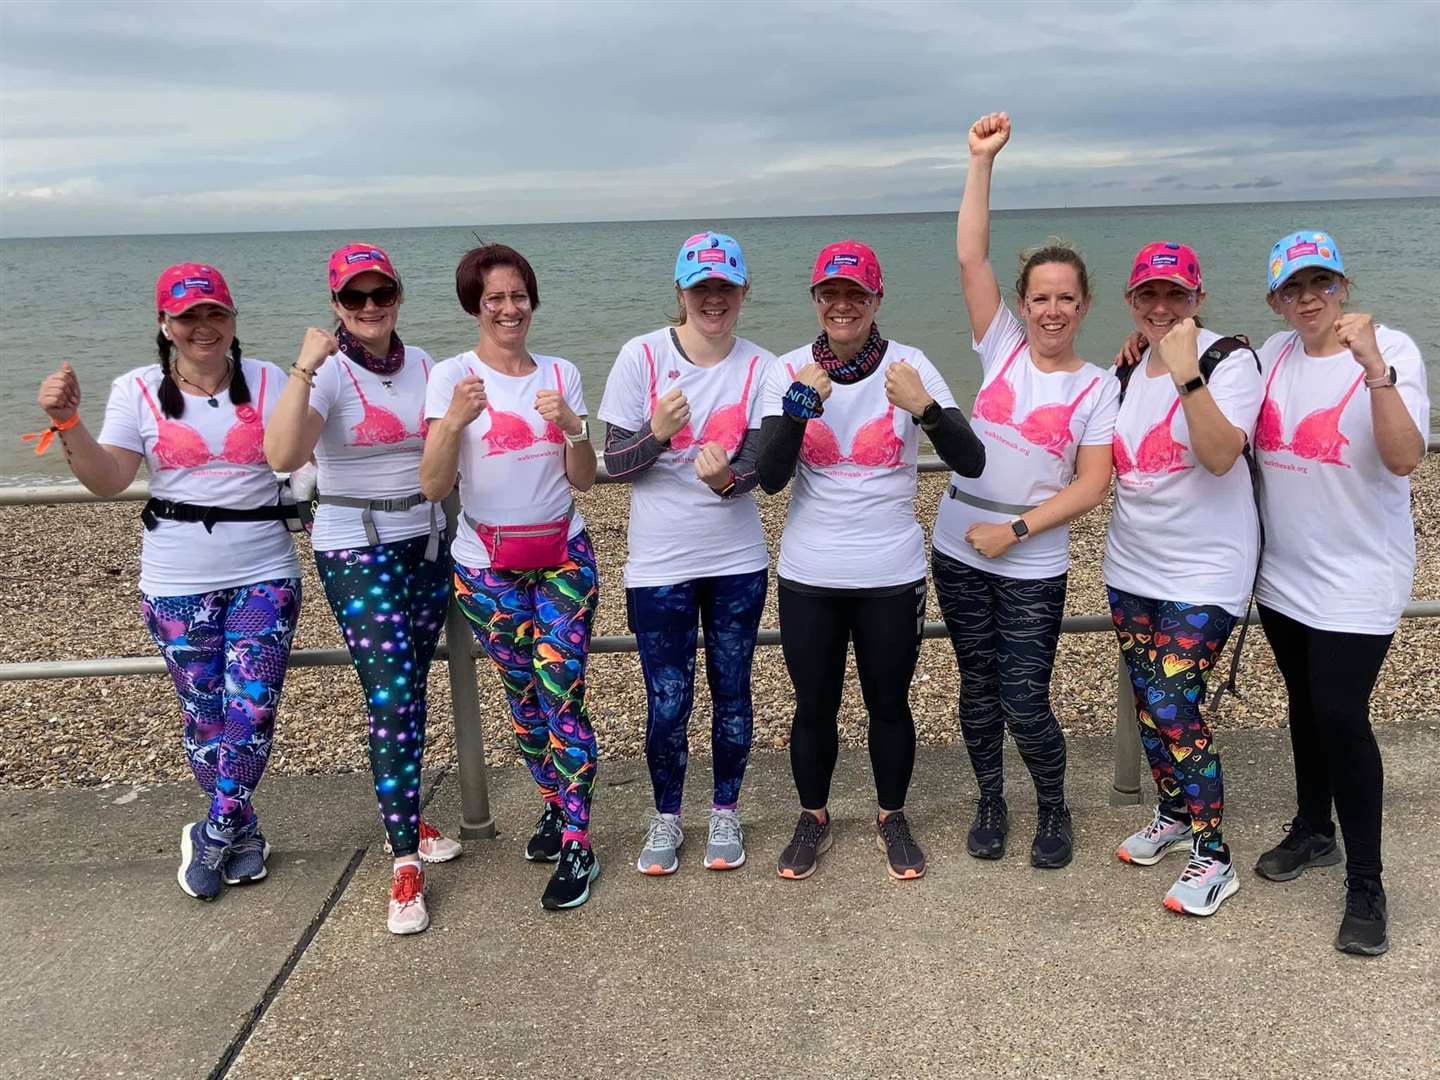 The end! The Sheppey Moonwalkers at The Leas, Minster after a marathon effort raising money for cancer treatment with Tina Nurden, Steph Gill, Liz Payne, Nichola Lassnig, Alex Holmes, Emma Lee and supporters. Picture: John Gill